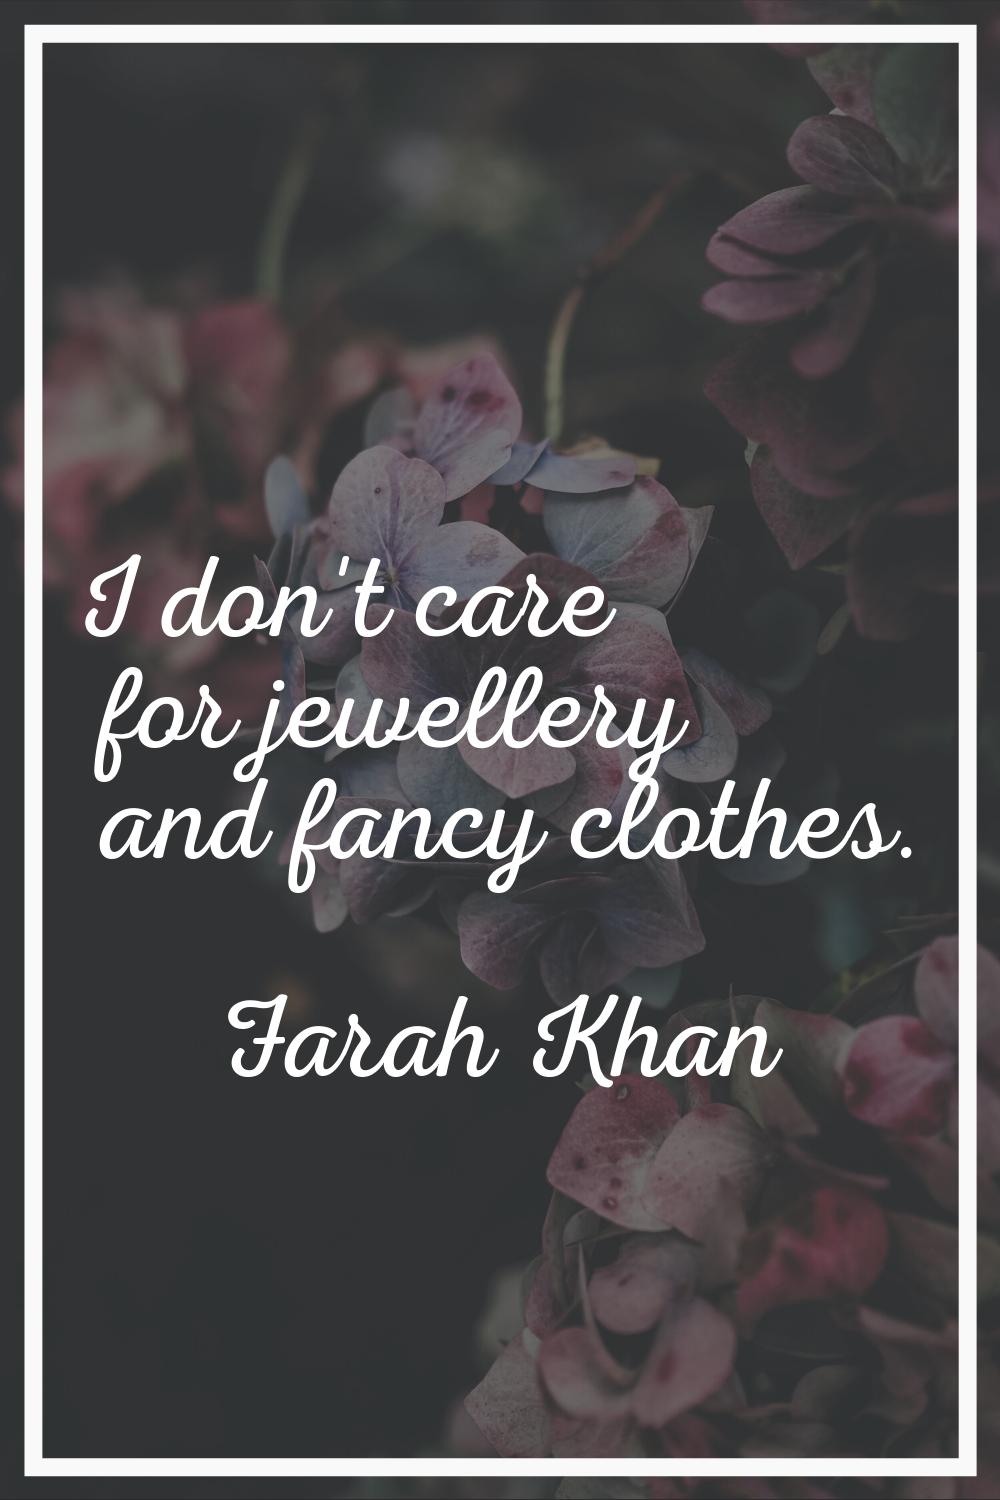 I don't care for jewellery and fancy clothes.